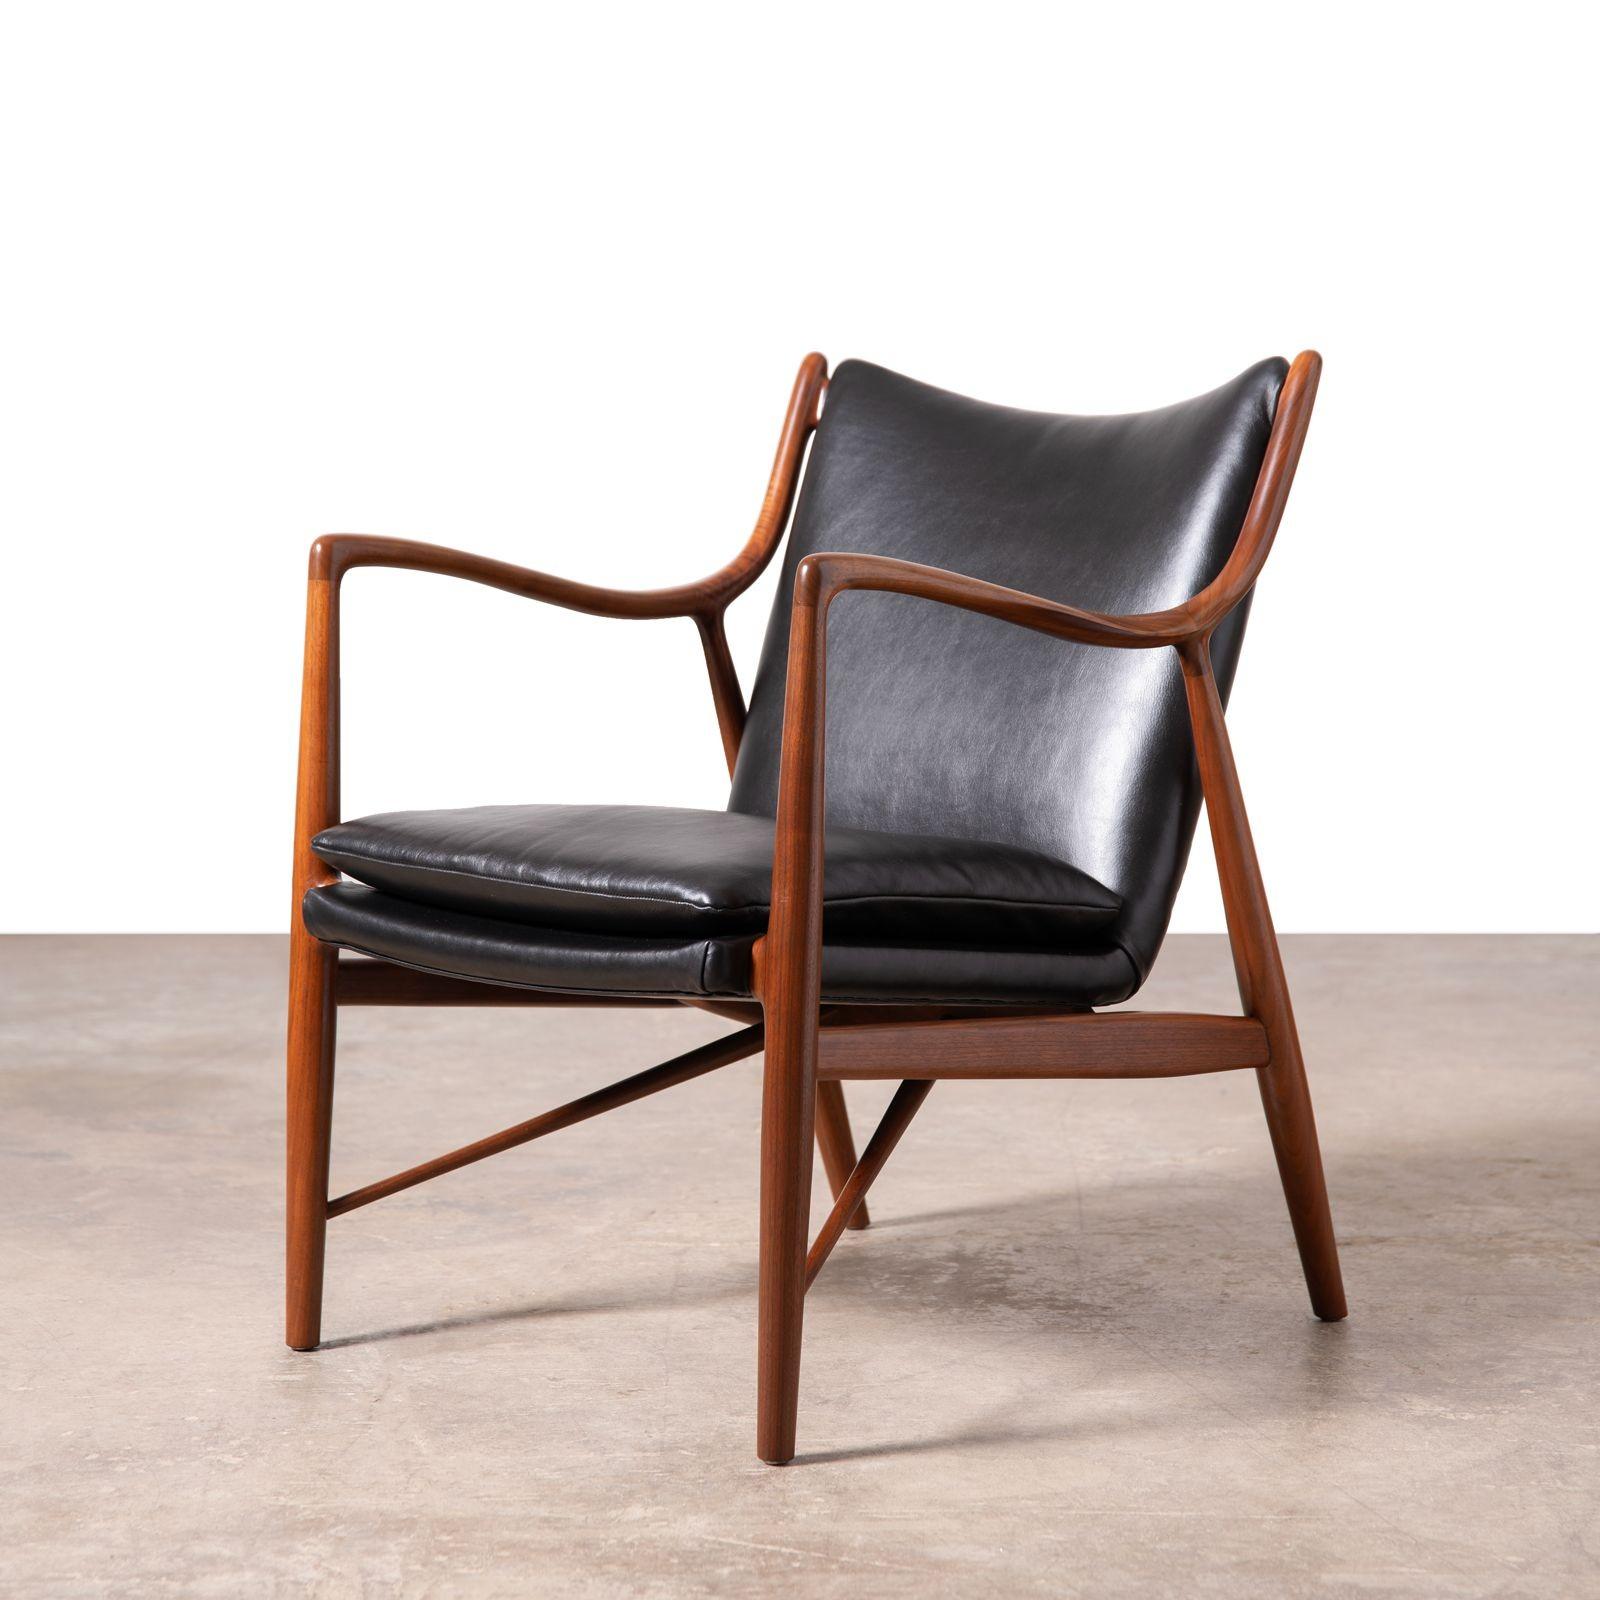 Finn Juhl NV-45 Scandinavian Lounge Chairs in Walnut and Black Leather 1950s In Excellent Condition For Sale In Dallas, TX